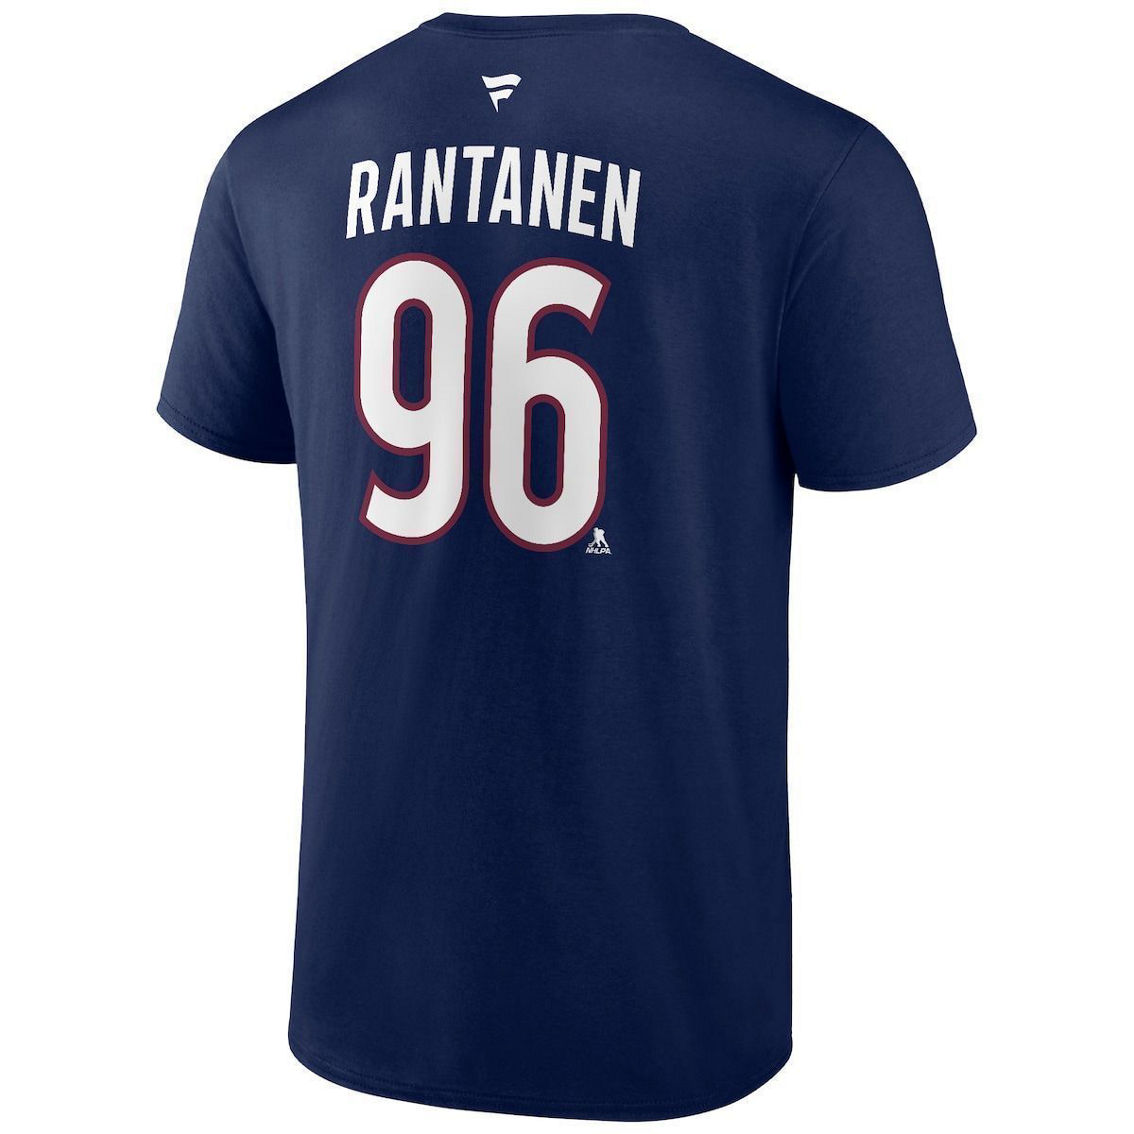 Fanatics Branded Men's Mikko Rantanen Navy Colorado Avalanche 2022 Stanley Cup s Authentic Stack Name & Number T-Shirt - Image 4 of 4